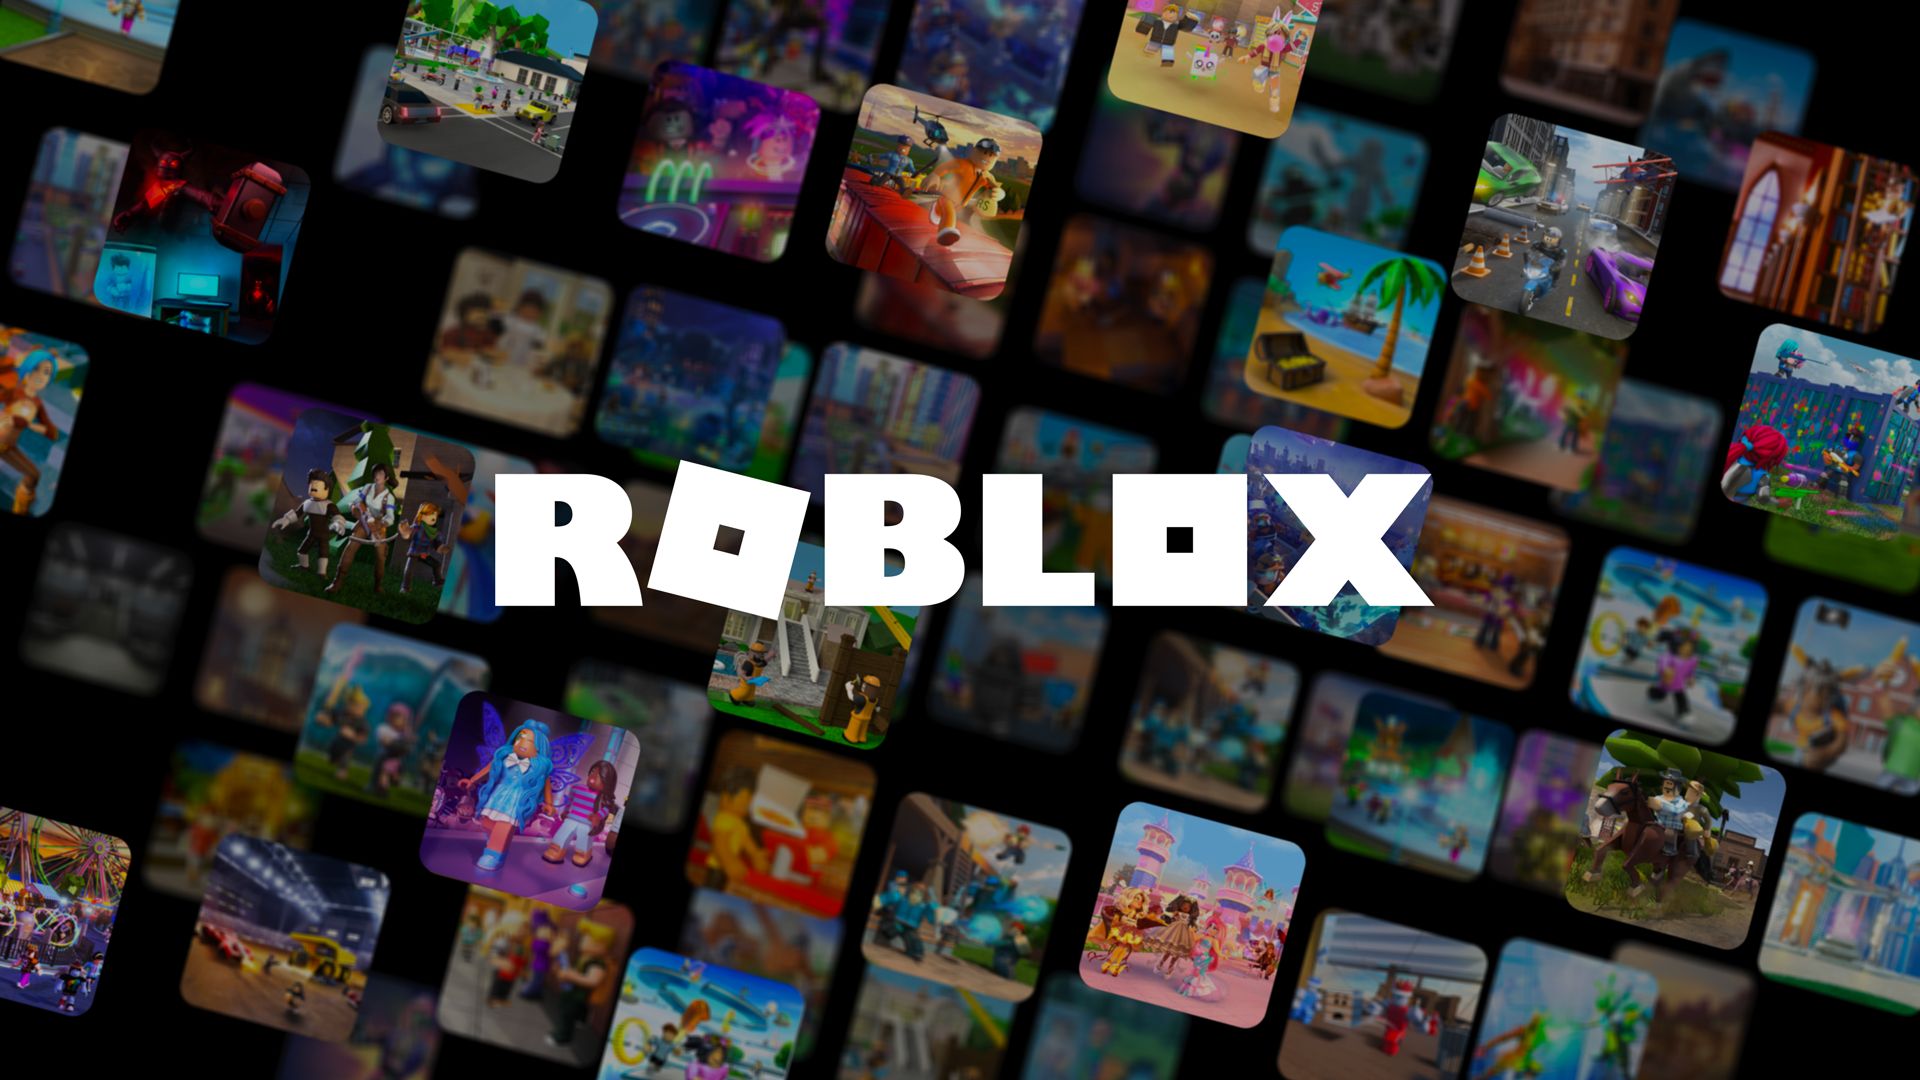 Today we are here to explain how to appear offline on Roblox. Some players are asking if they can you play Roblox offline. Do you know How to change privacy settings or how to edit your following options on Roblox? We explain everything in detail below.